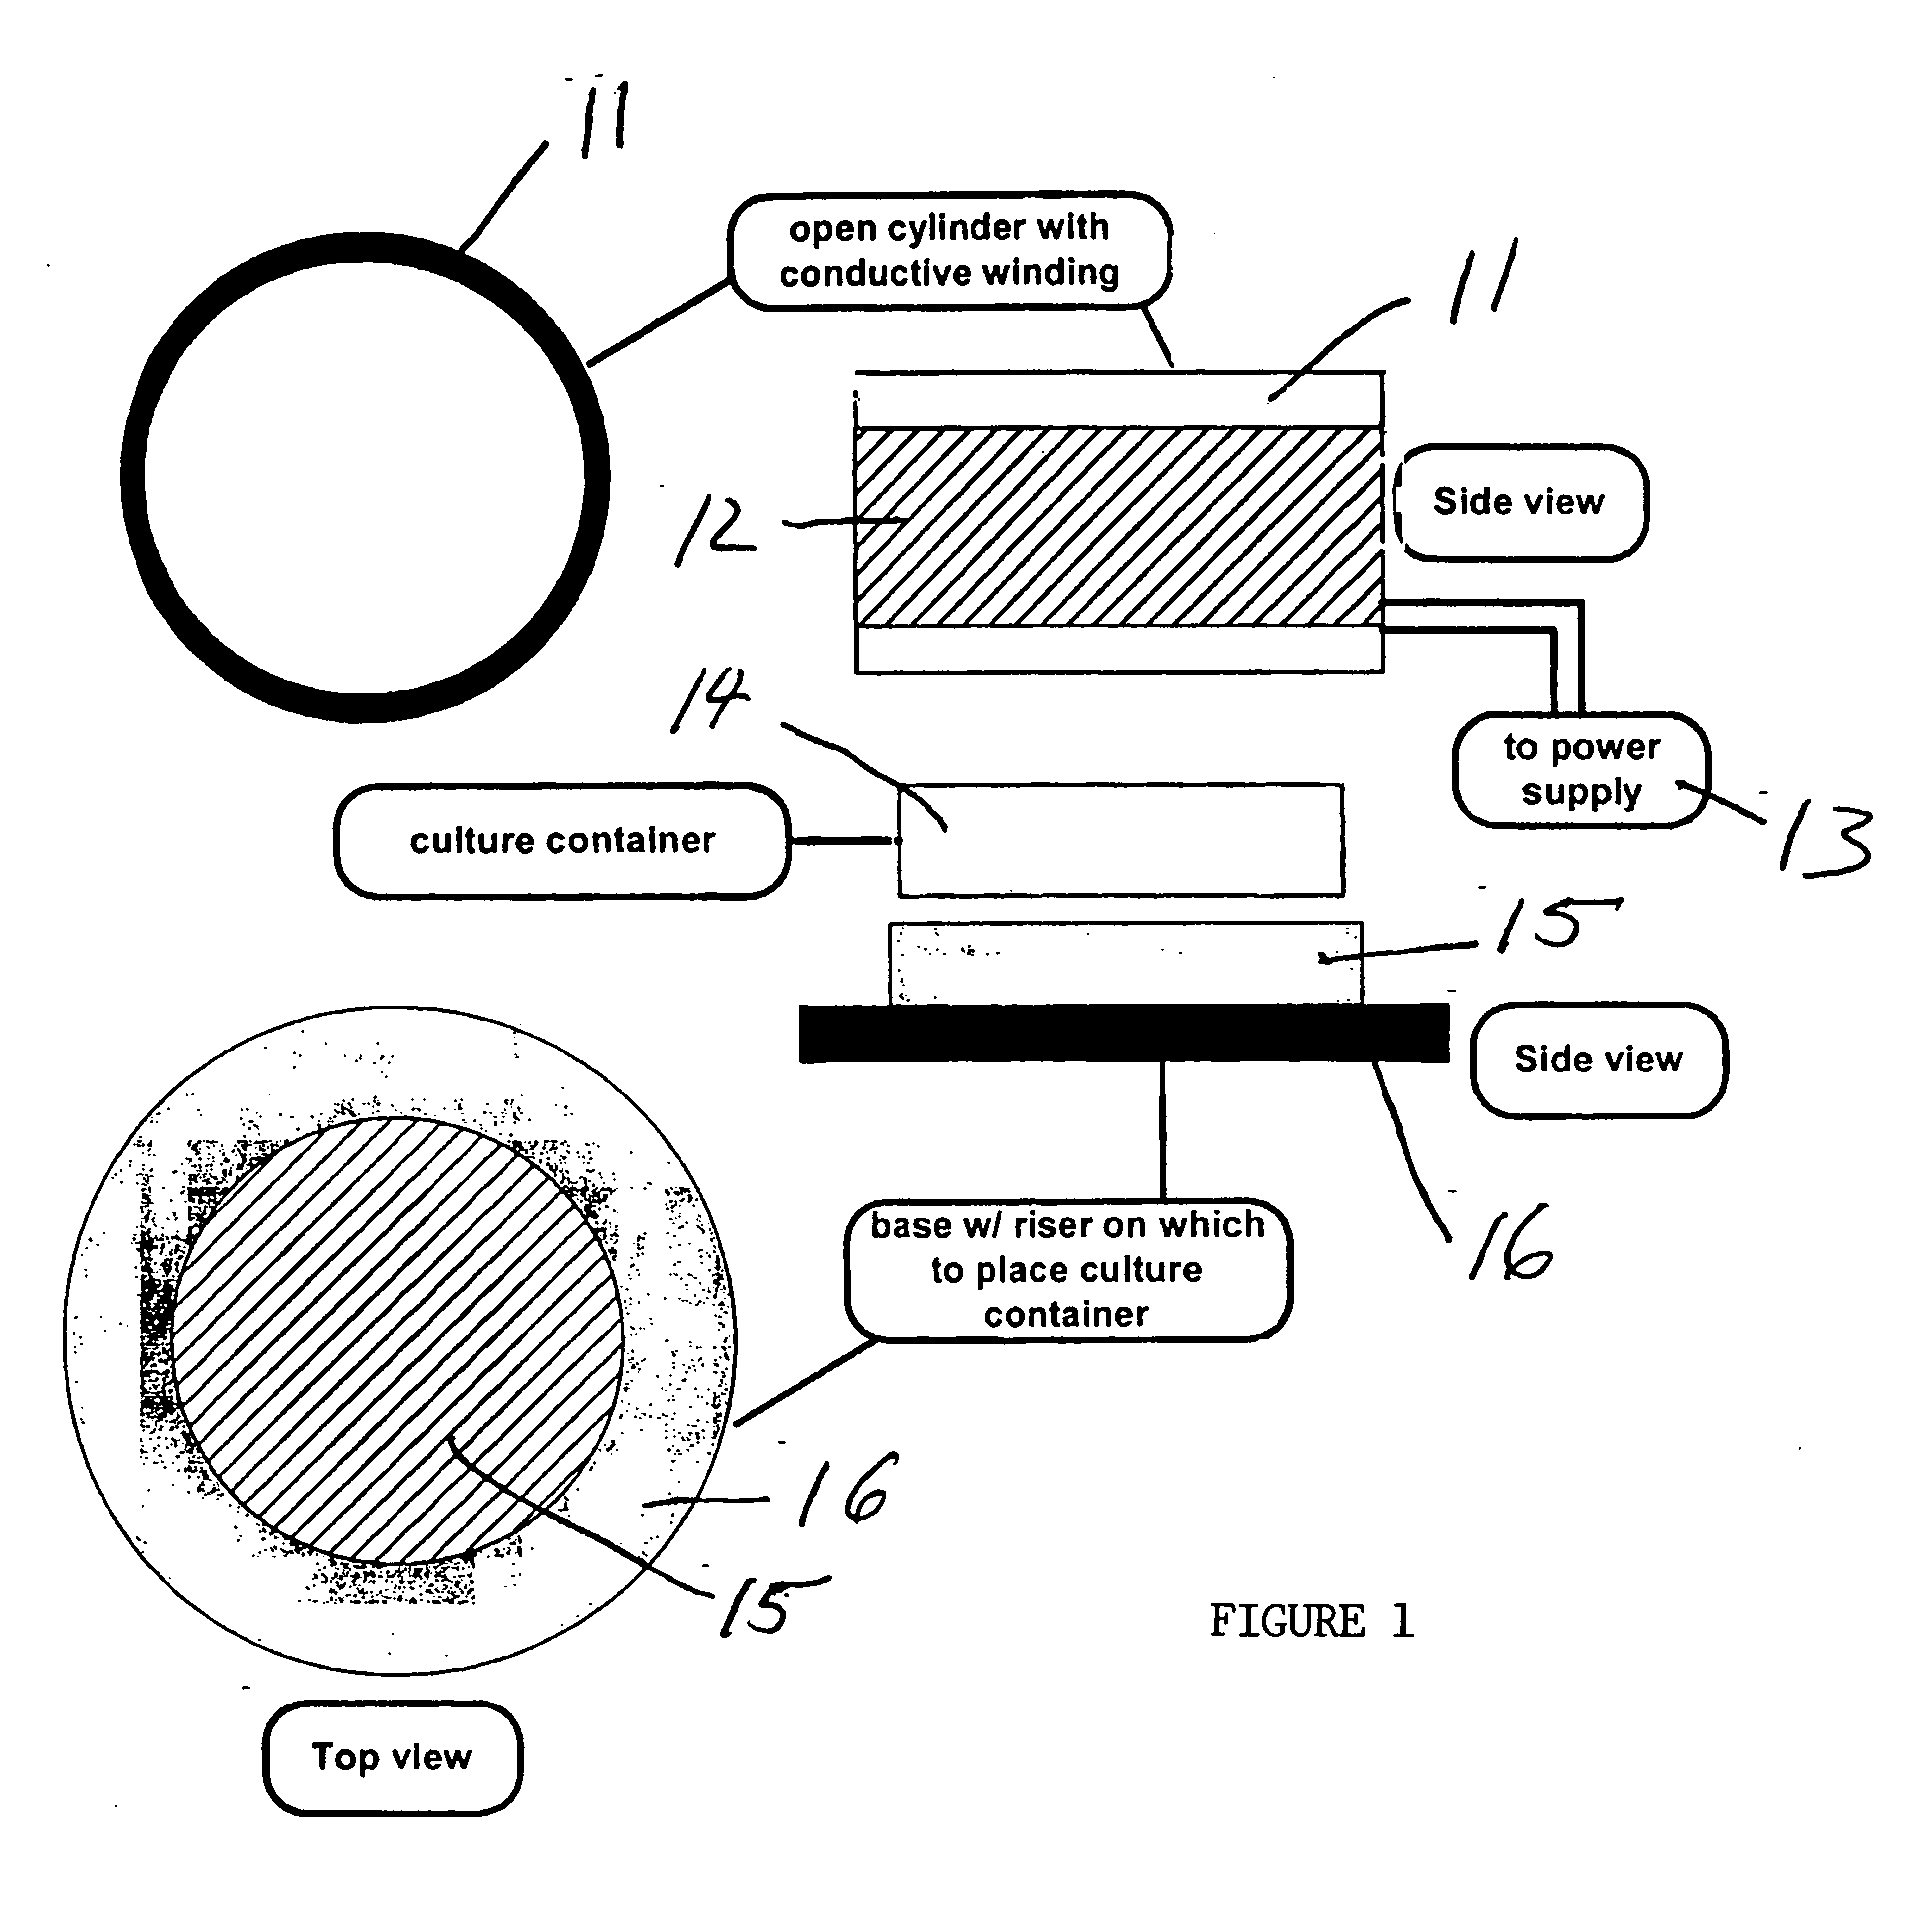 Apparatus for enhancing proliferation of cells in a small-scale cell culturing container